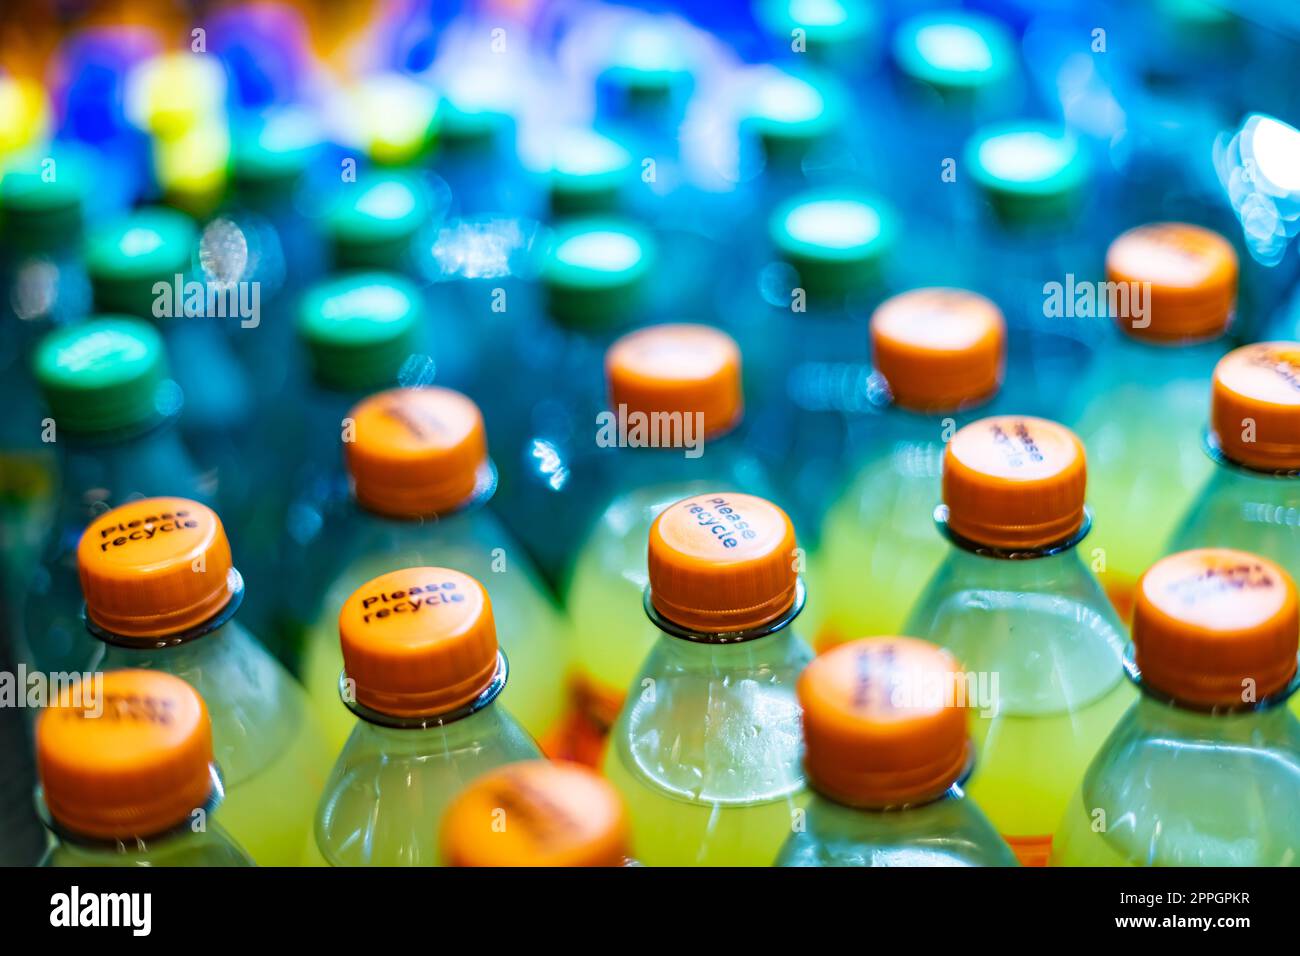 Bottles of drinks put out for sale in a commercial refrigerator Stock Photo